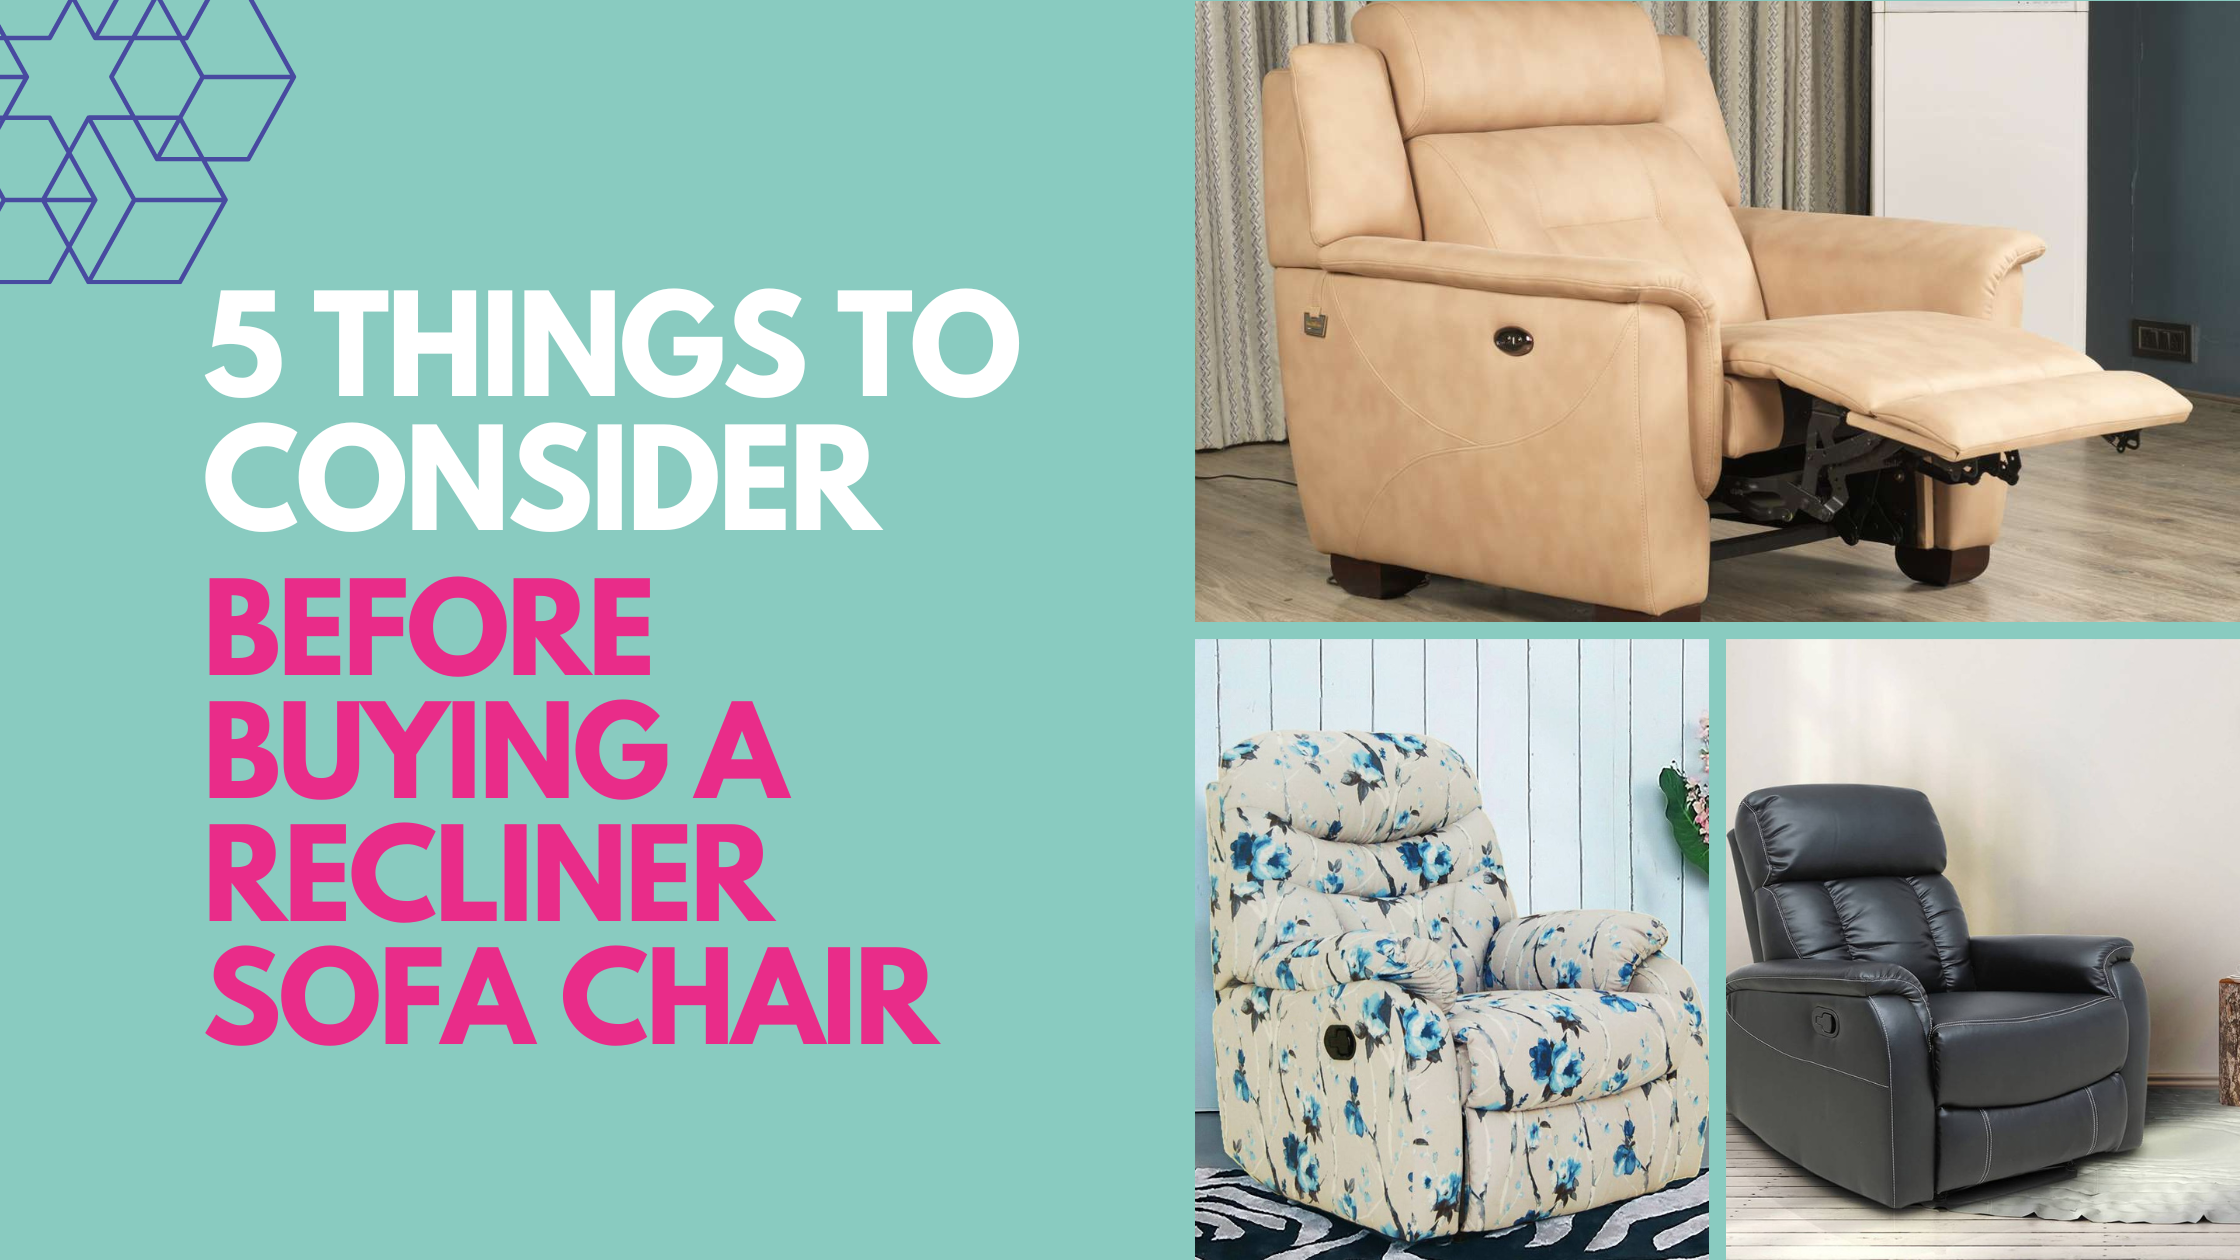 5 things to consider before buying a recliner sofa chair